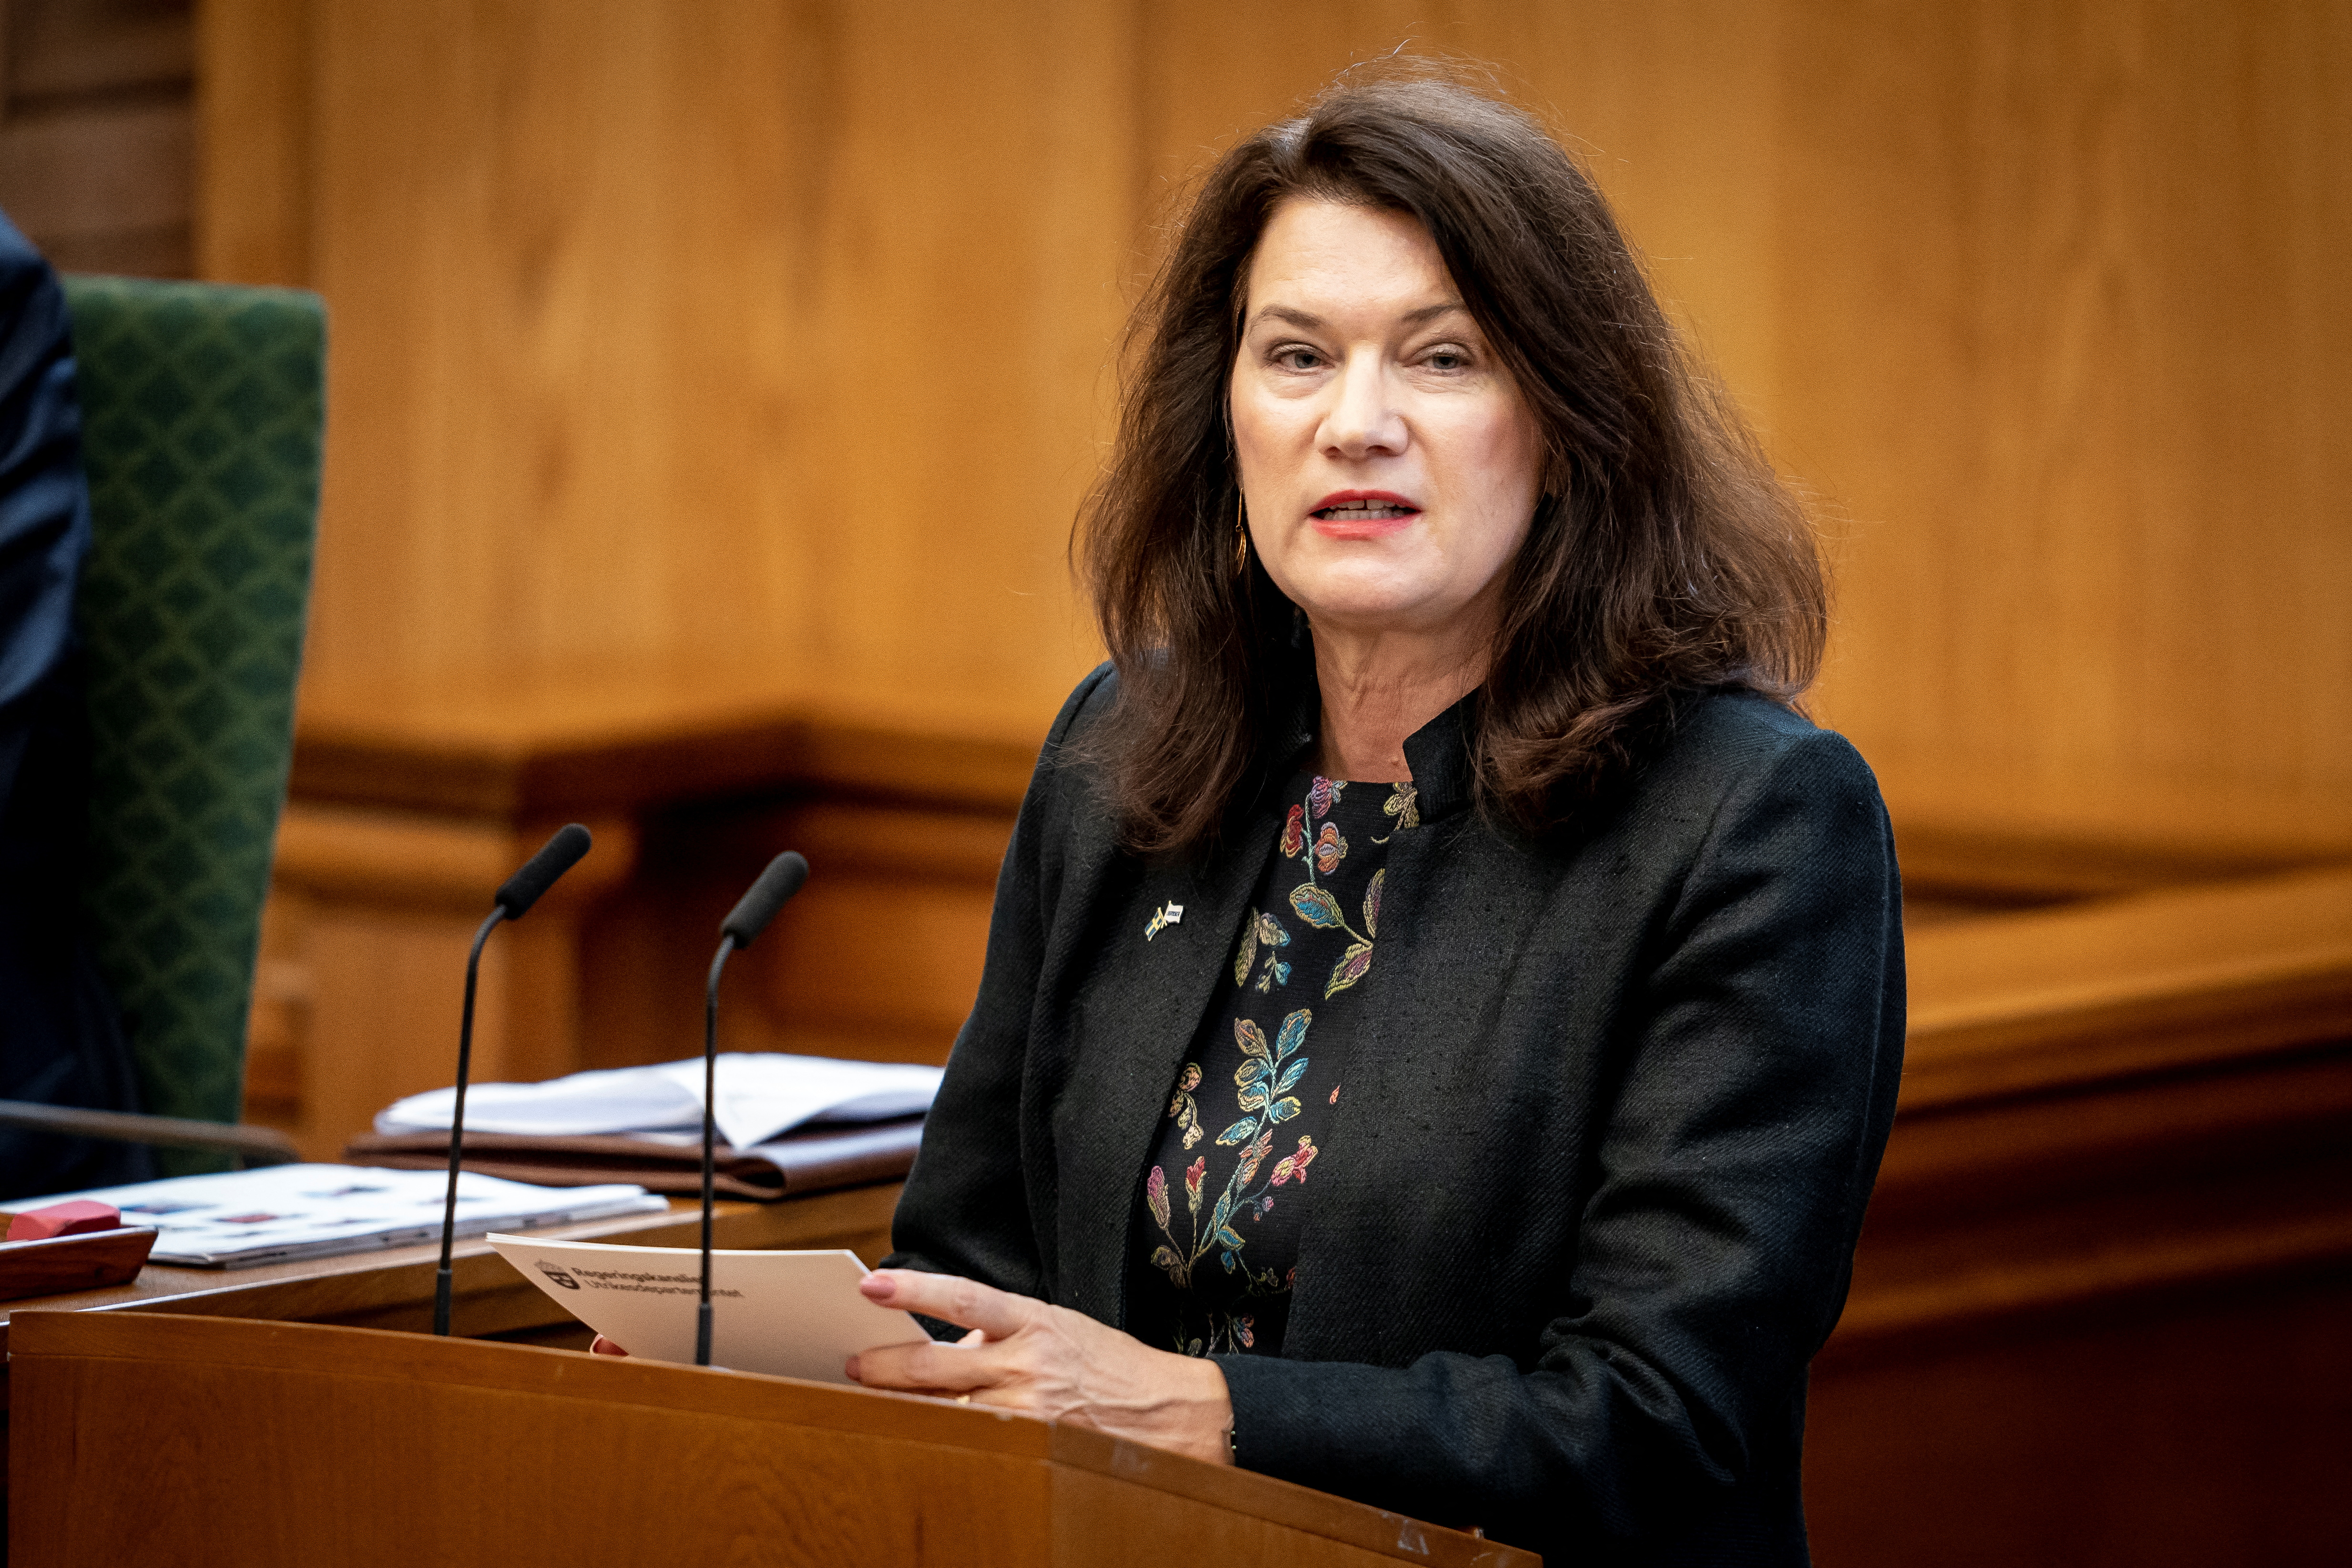 Minister of Foreign Affairs of Sweden Ann Linde during the Foreign Ministers statements at the Nordic Council Session 2021, in the Folketing Hall at Christiansborg, in Copenhagen